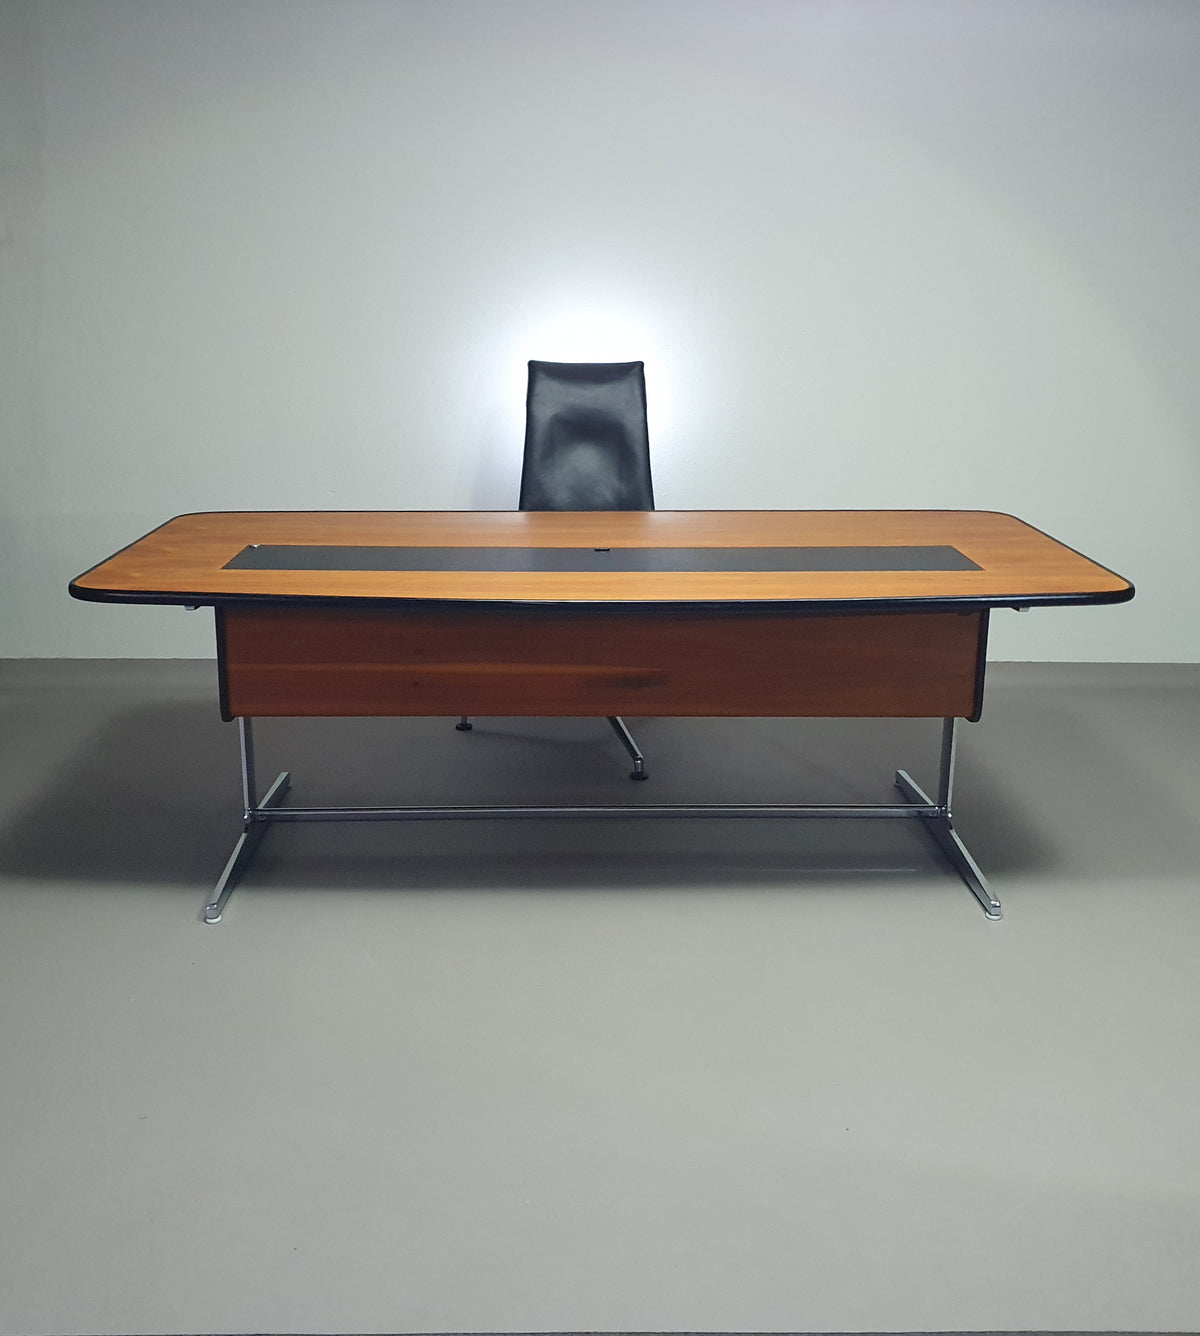 George Nelson / Type Action office conference desk Manufacturer Herman Miller Year 1964 